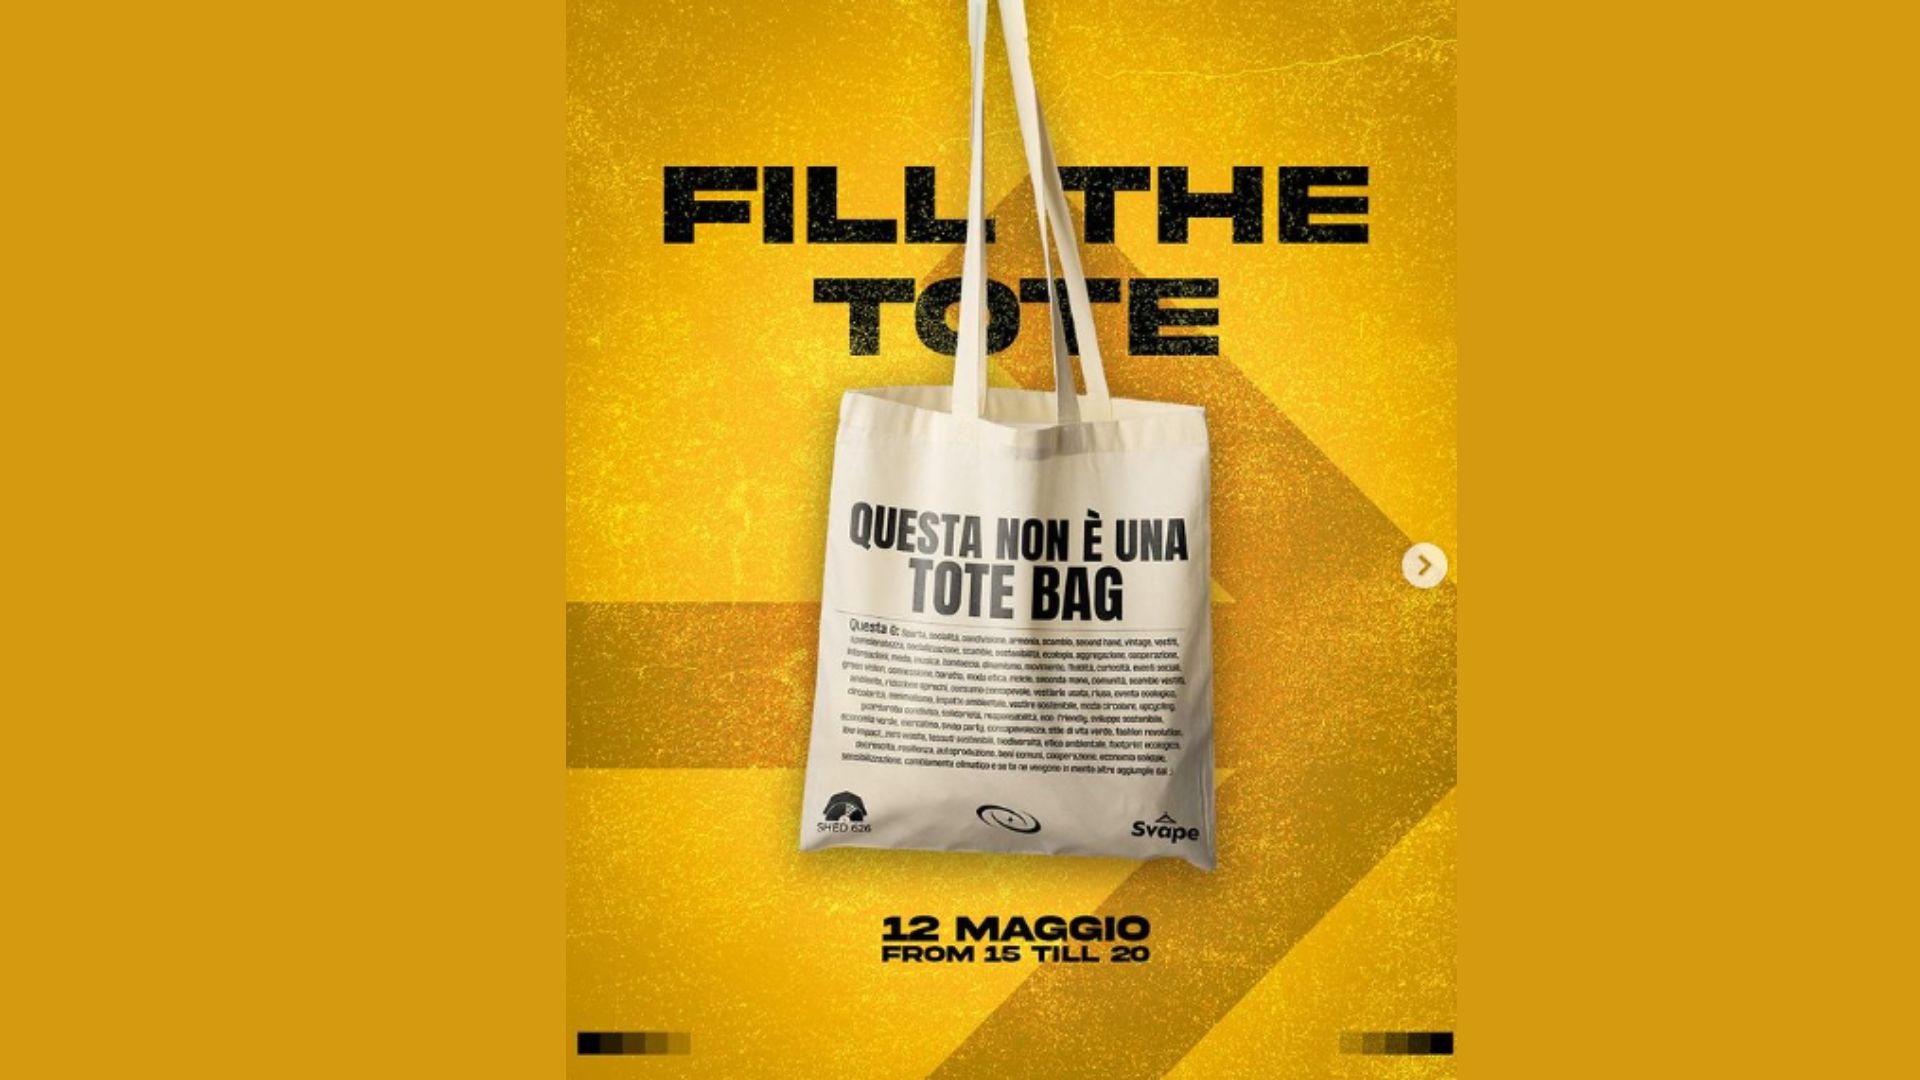 FILL THE TOTE BAG